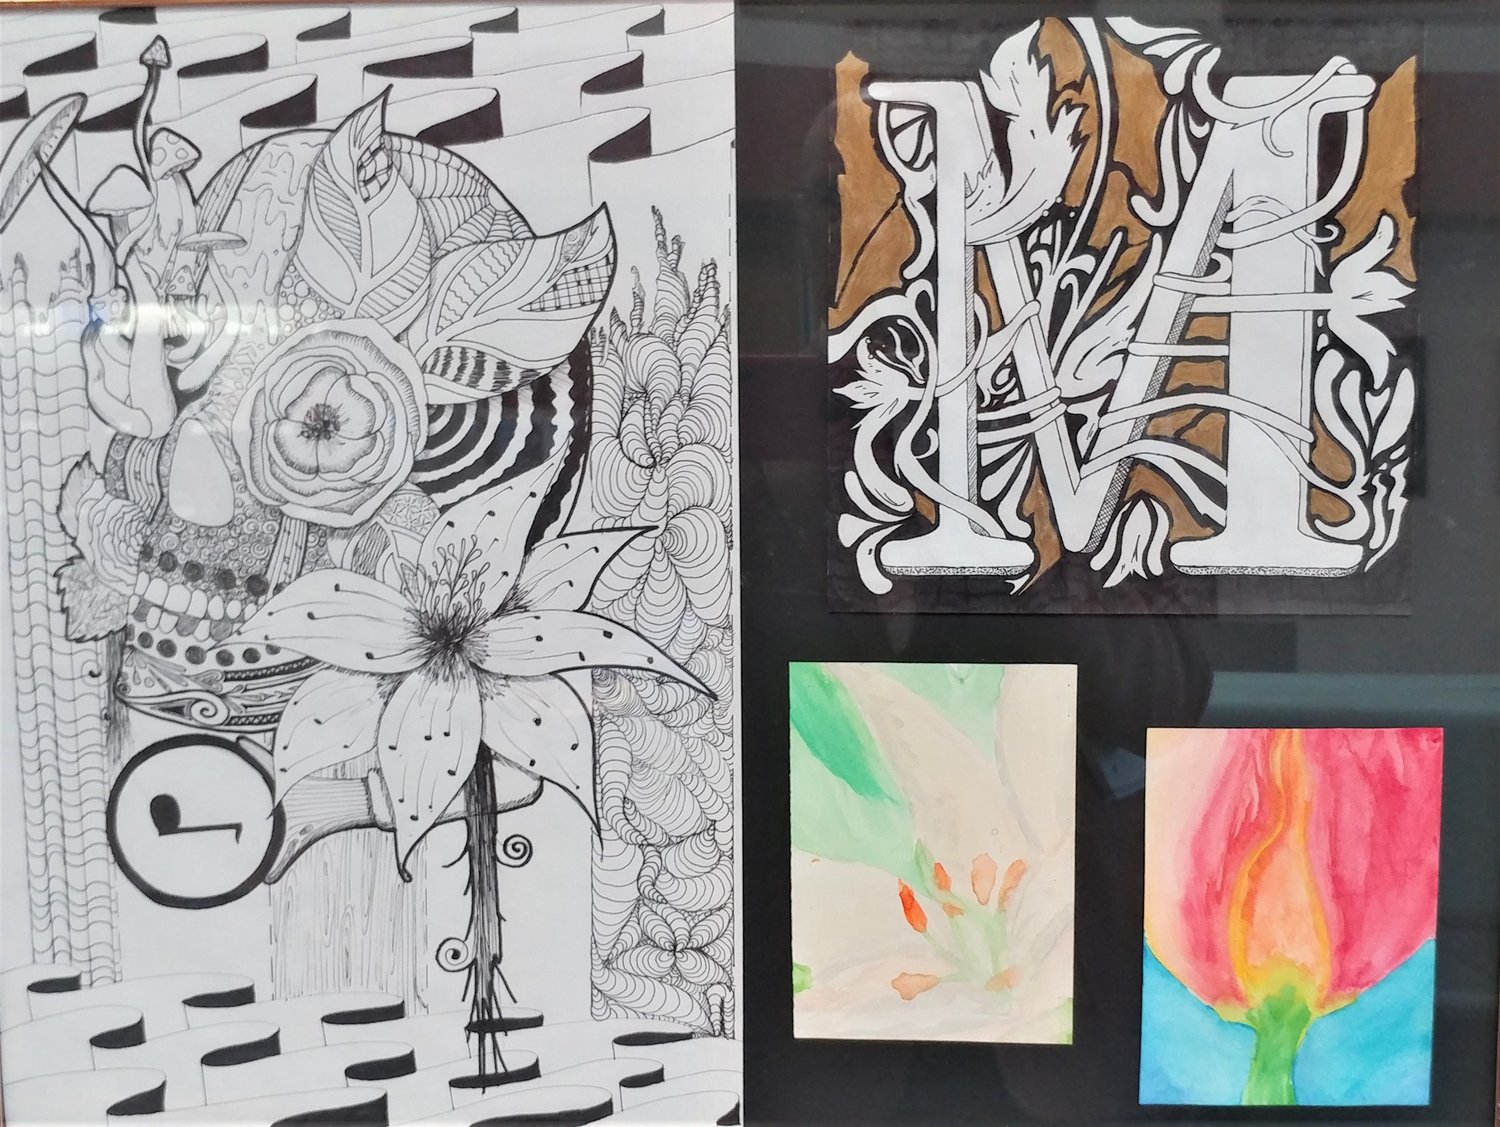 “Music,” by Mina Duran, ninth grade, pen; “M,” by Reyes Perez, 11th grade, mixed media; “Lily,” by McKenna Selberg, 11th grade, watercolor; “I Wish You Tulips,” by Axsael Miramontes, 1oth grade, watercolor. All are students at Organ Mountain High School